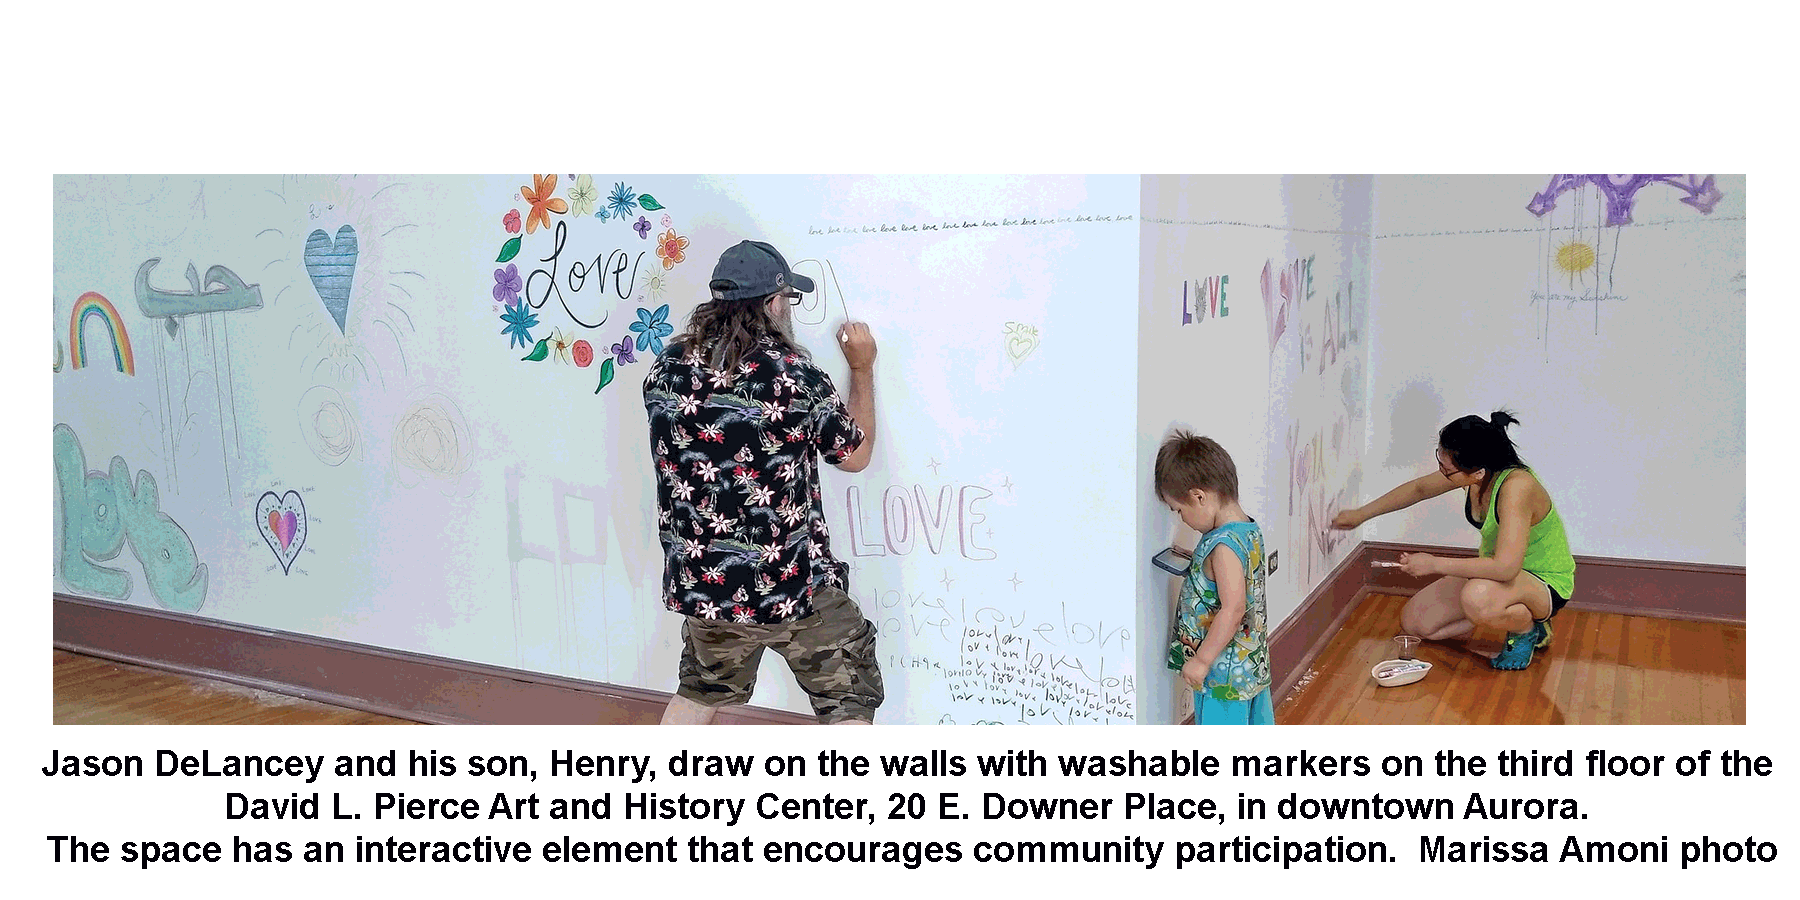 Jason DeLancey and his son, Henry, draw on the walls with washable markers on the third floor of the David L. Pierce Art and History Center, 20 E. Downer Place, in downtown Aurora. The space has an interactive element that encourages community participation. Marissa Amoni photo